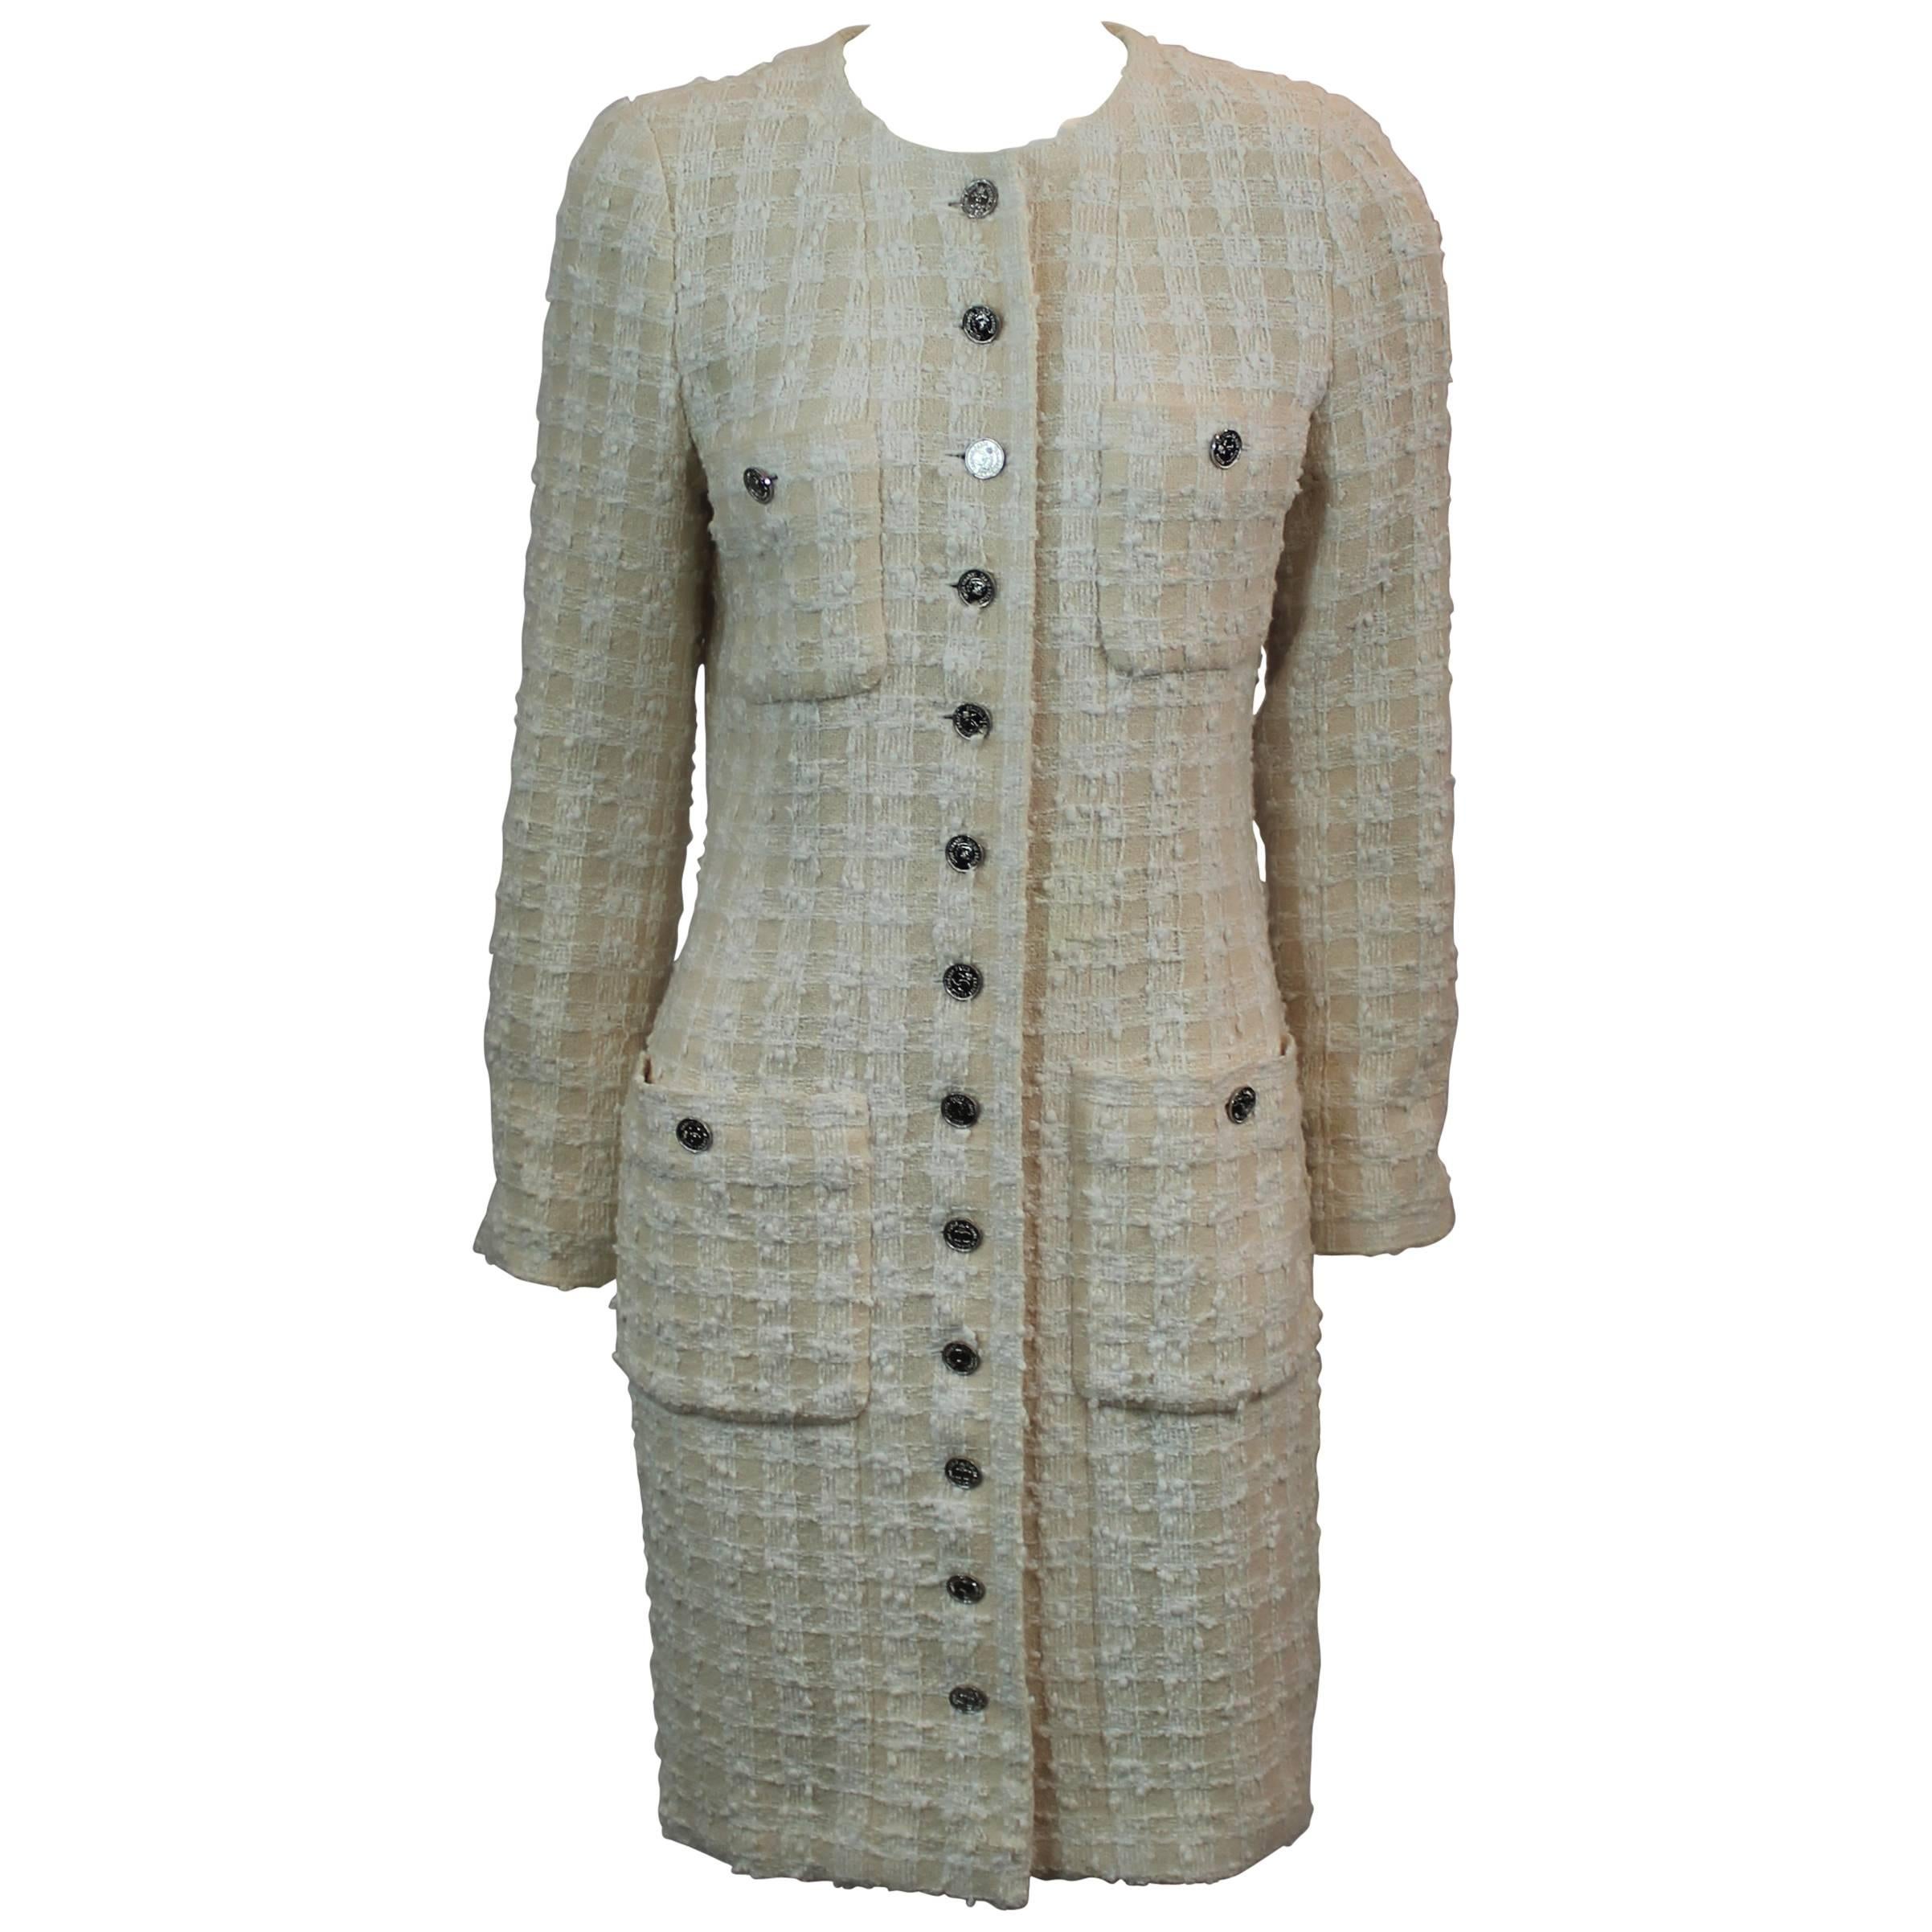 Chanel Cream Cotton Blend Boucle 3/4 Coat with 4 Pockets - S - 1980's